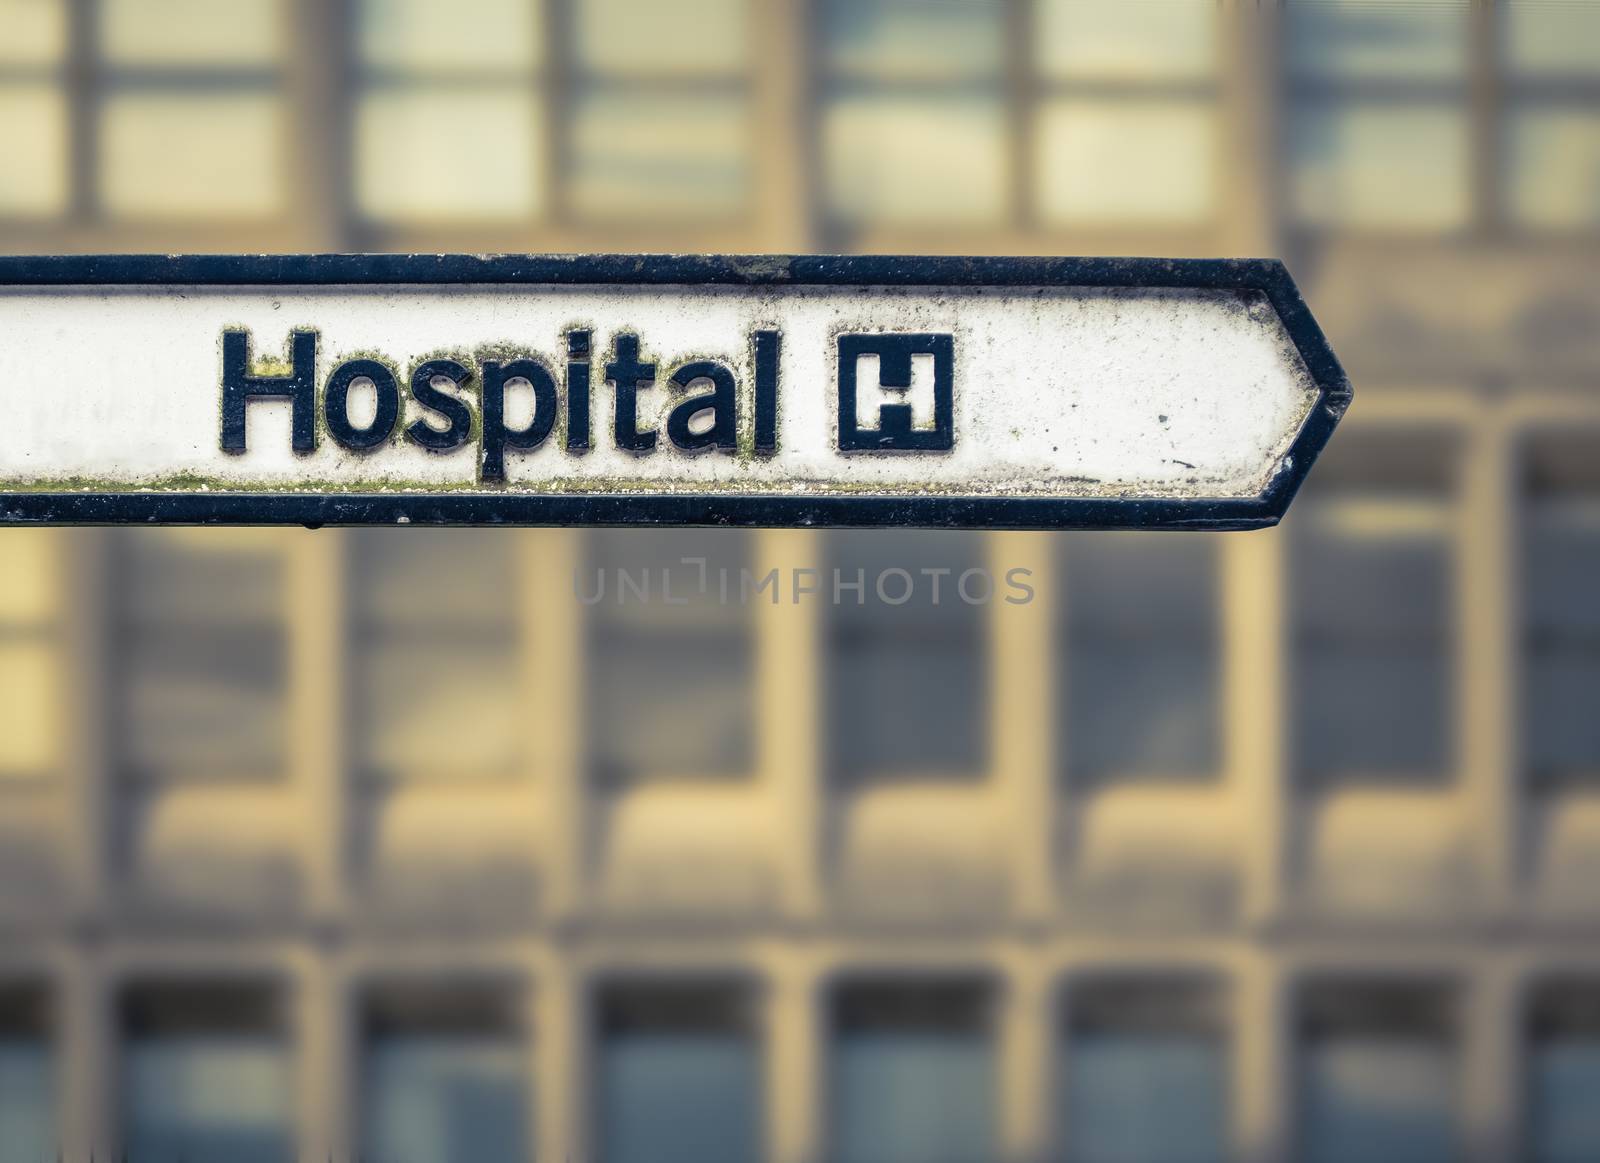 A Grungy Sign For A National Health Service Hospital In An Urban Area In The UK